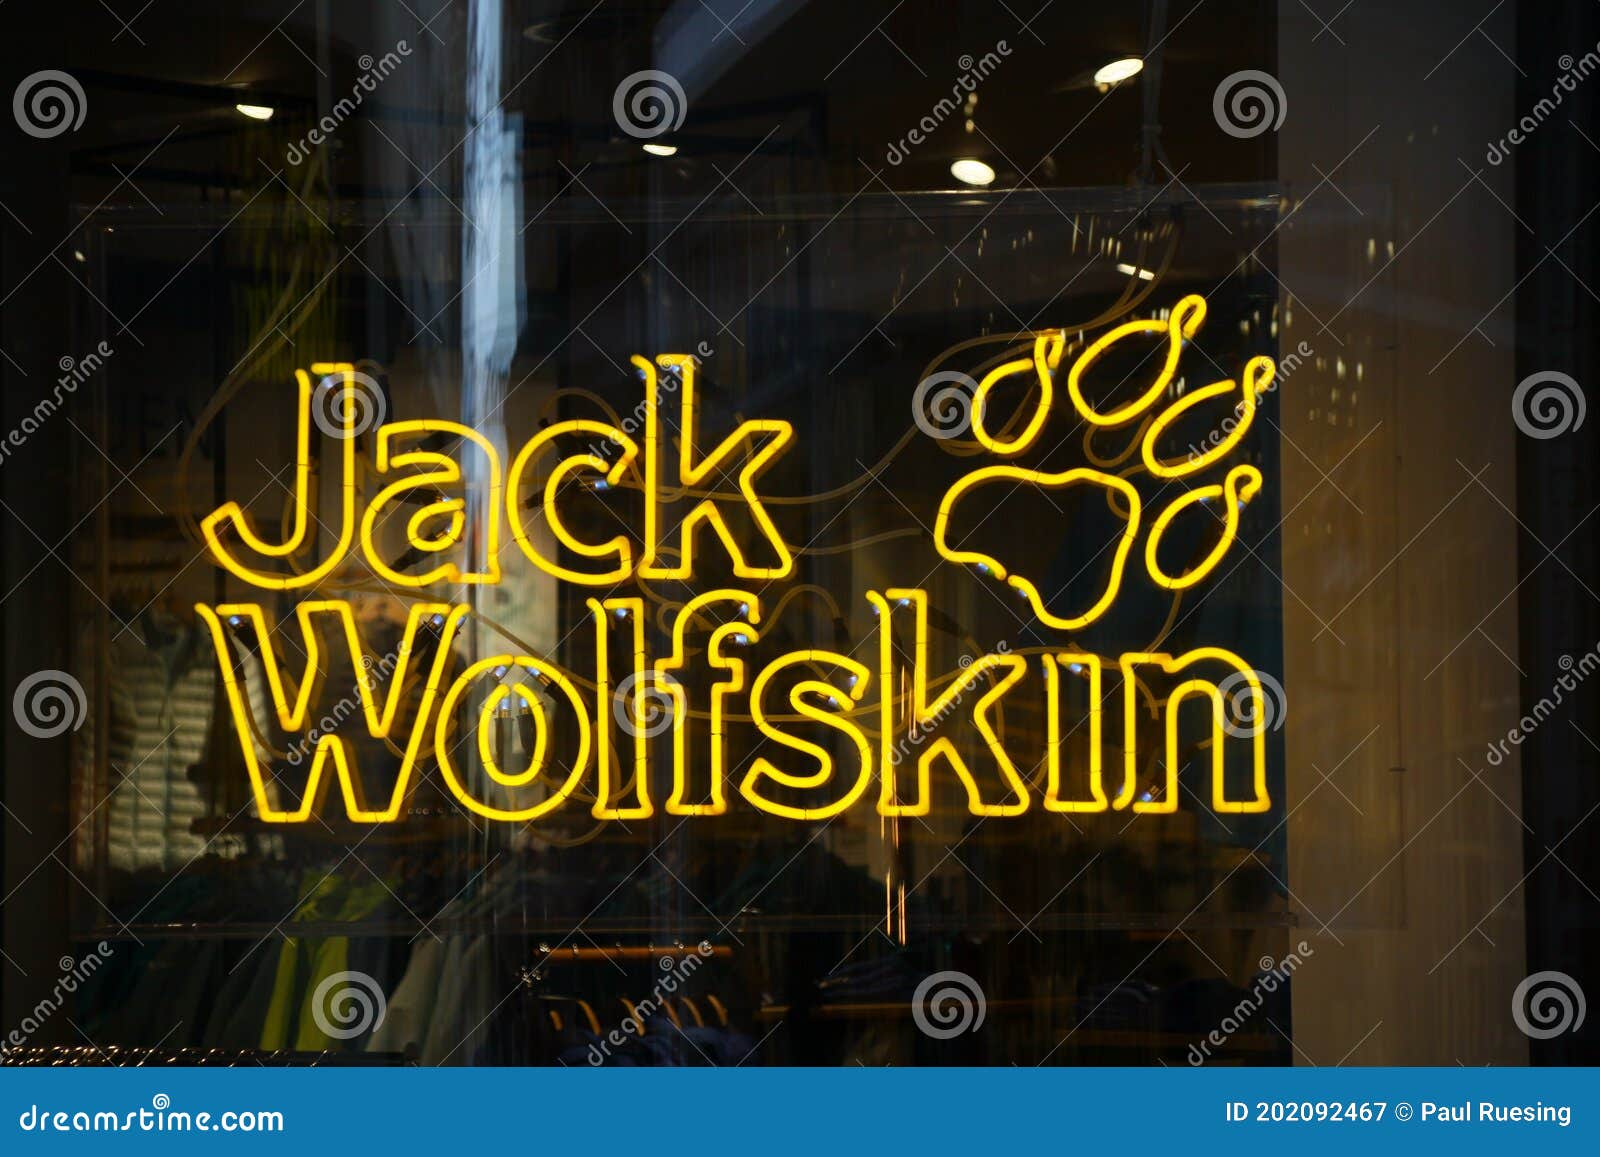 Jack Wolfskin Company, Logo in the Shopping Street of Paderborn, North ...